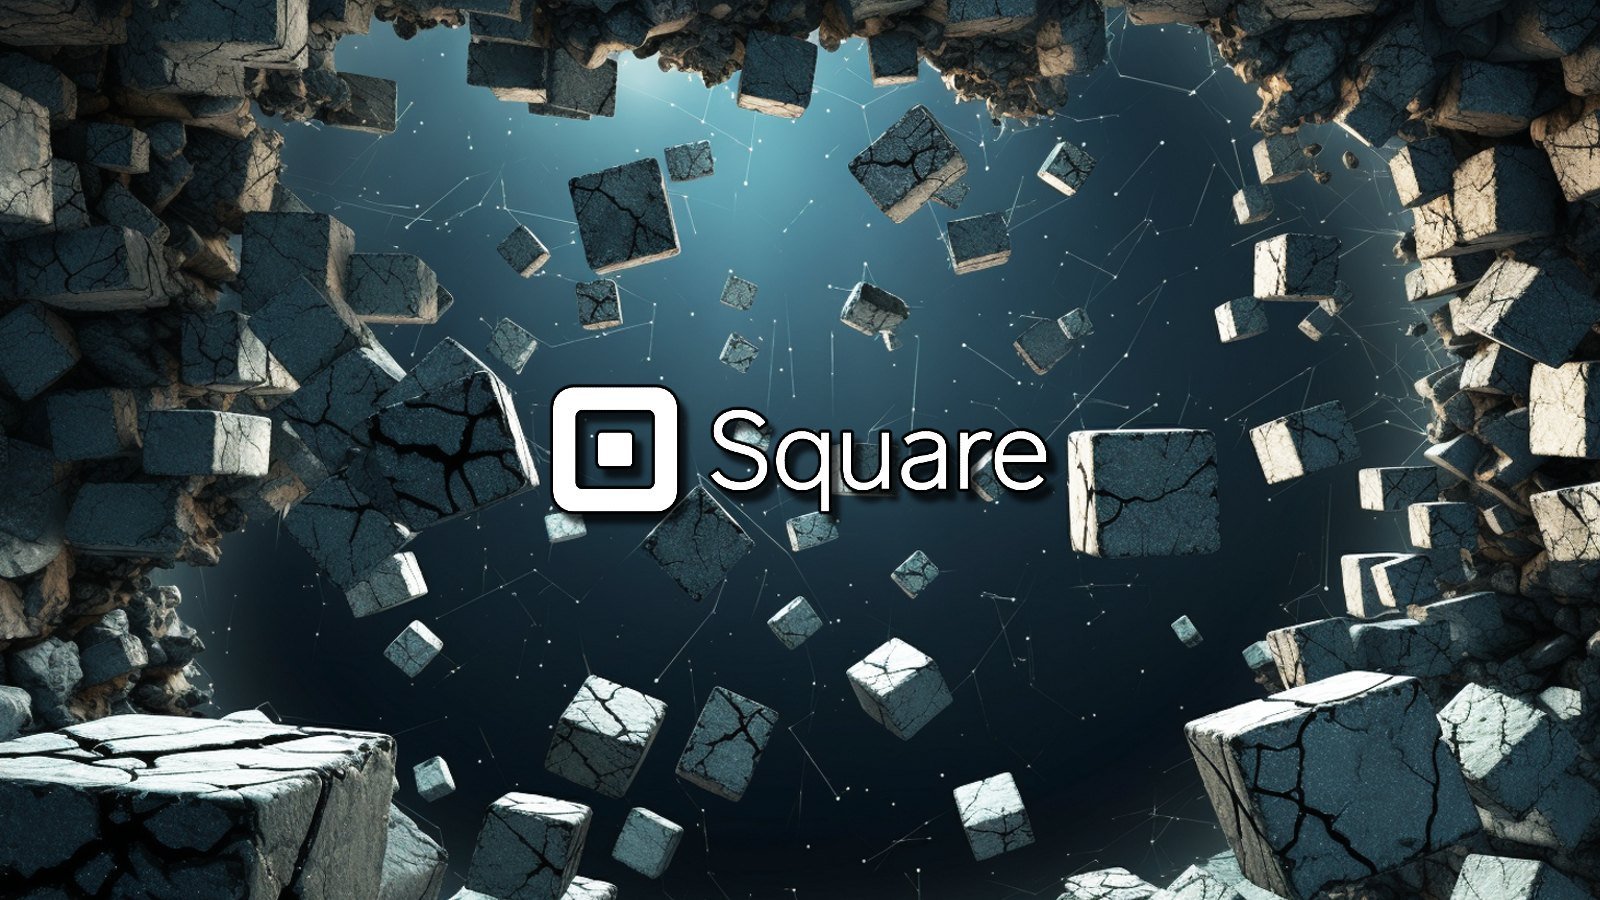 Square: Last week’s outage was caused by DNS issue, not a cyberattack – Source: www.bleepingcomputer.com